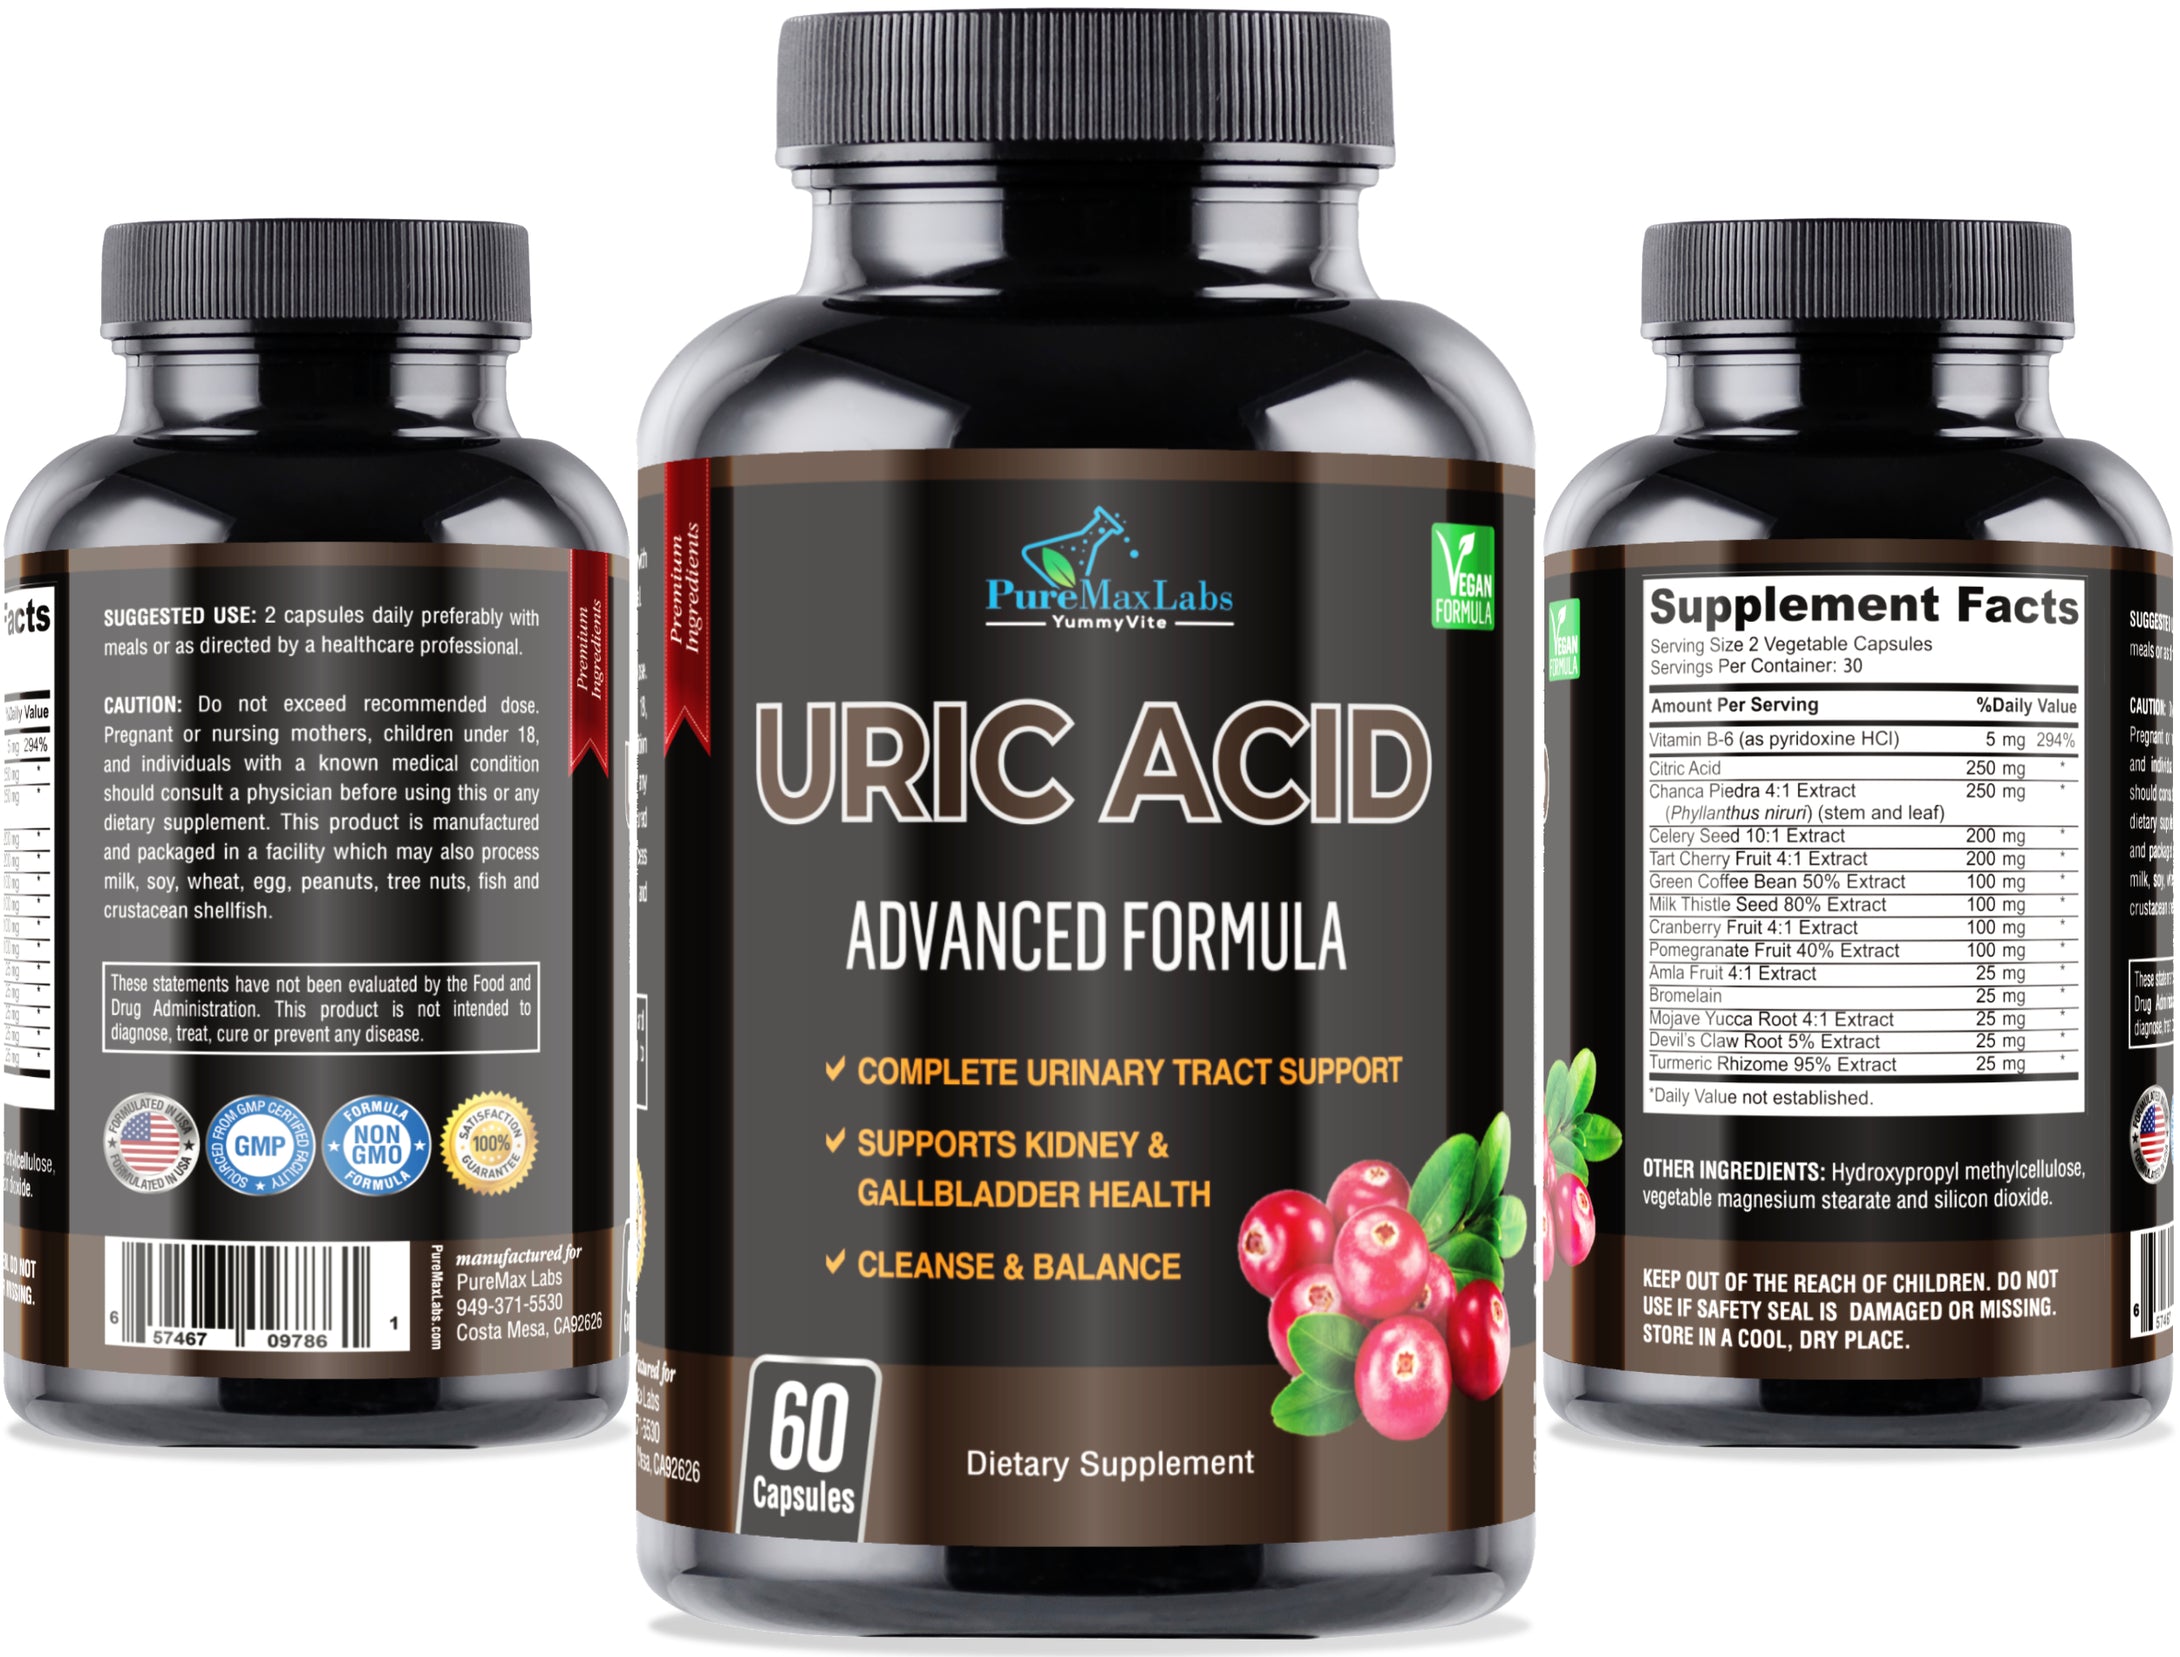 Uric Acid Advanced Formula, Urinary Tract Support - 60 Capsules